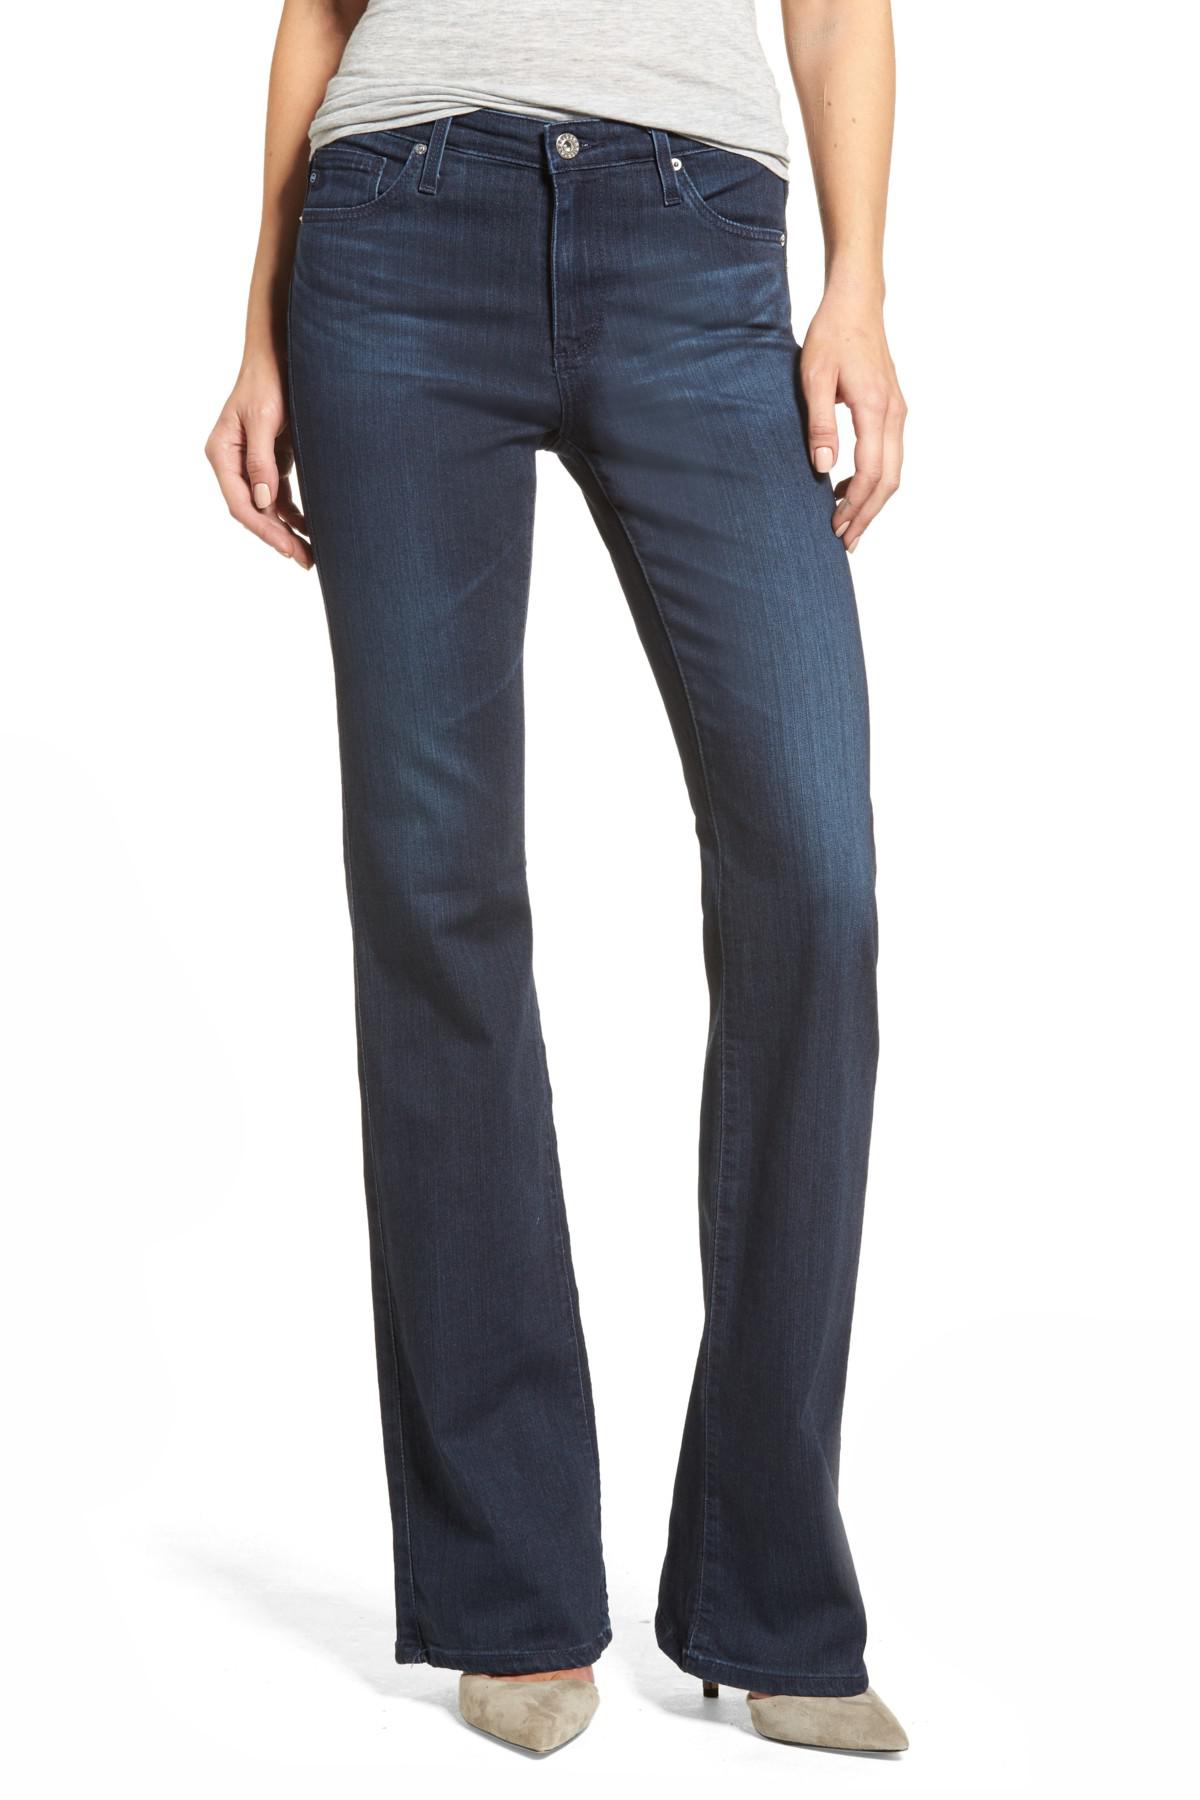 Lyst - Ag Jeans Angel High Rise Boot Cut Jeans in Blue